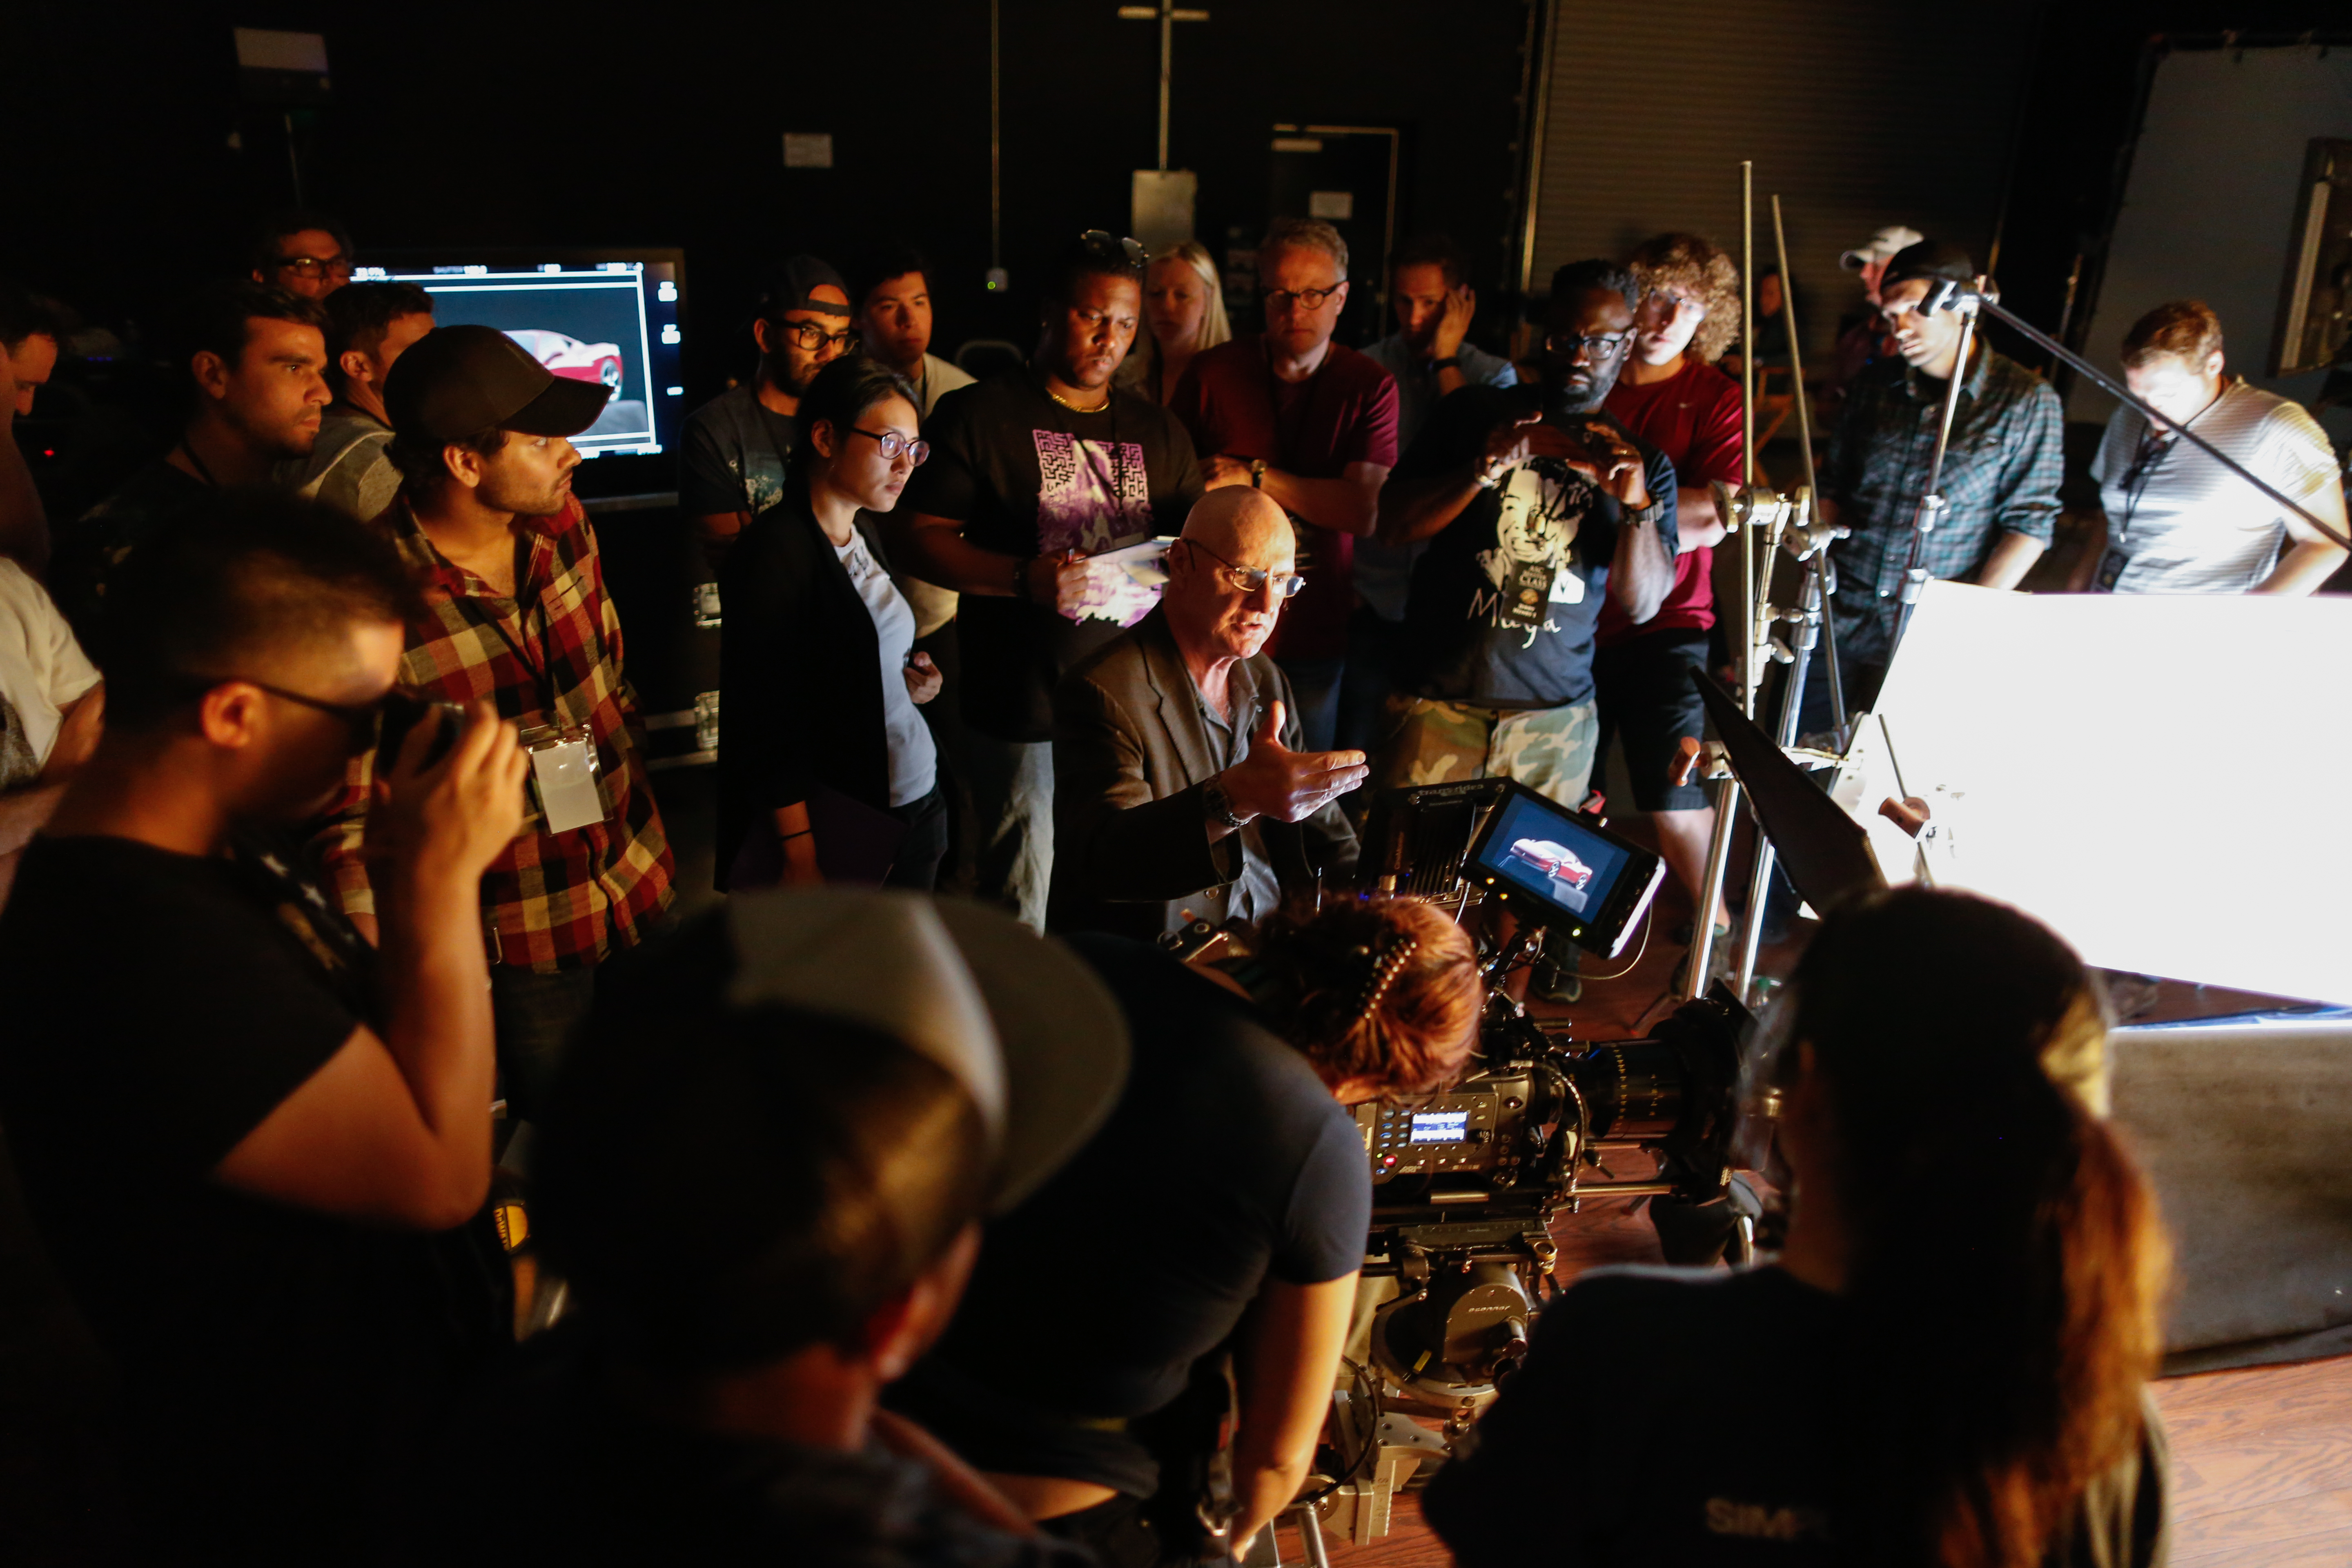 Bill Bennett, ASC lectures on the set of commercial photography.